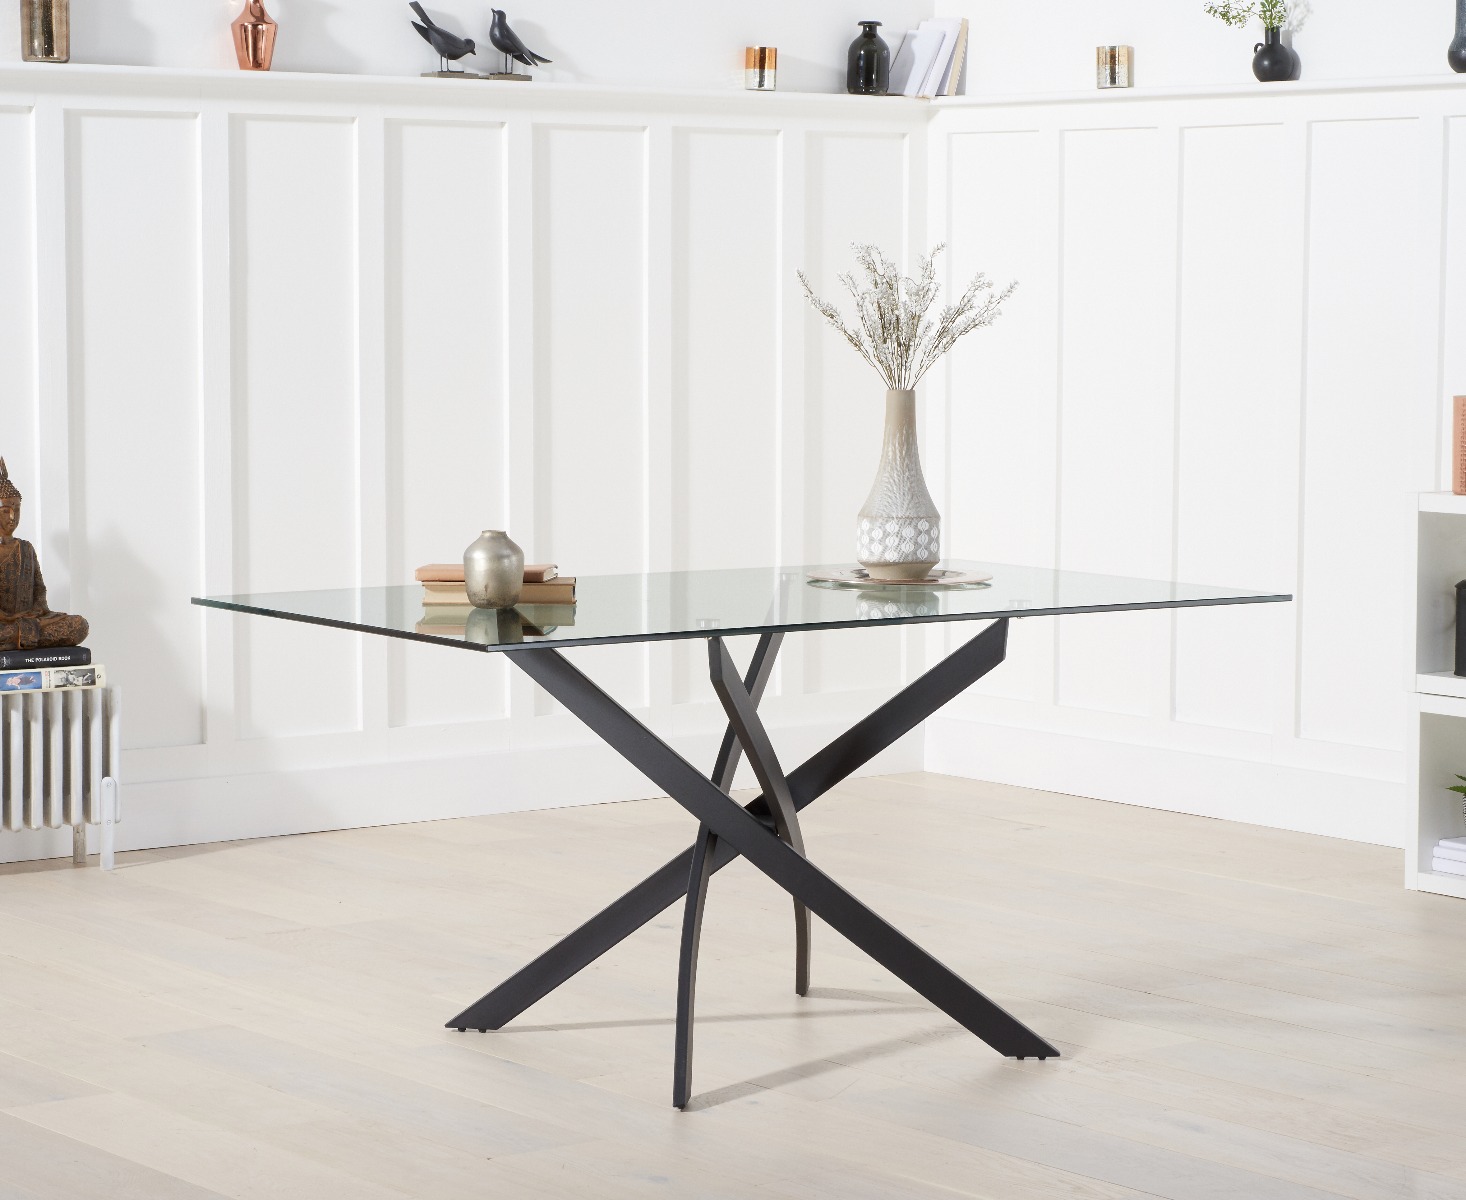 Photo 2 of Mara 160cm glass dining table with 4 brown brody antique chairs